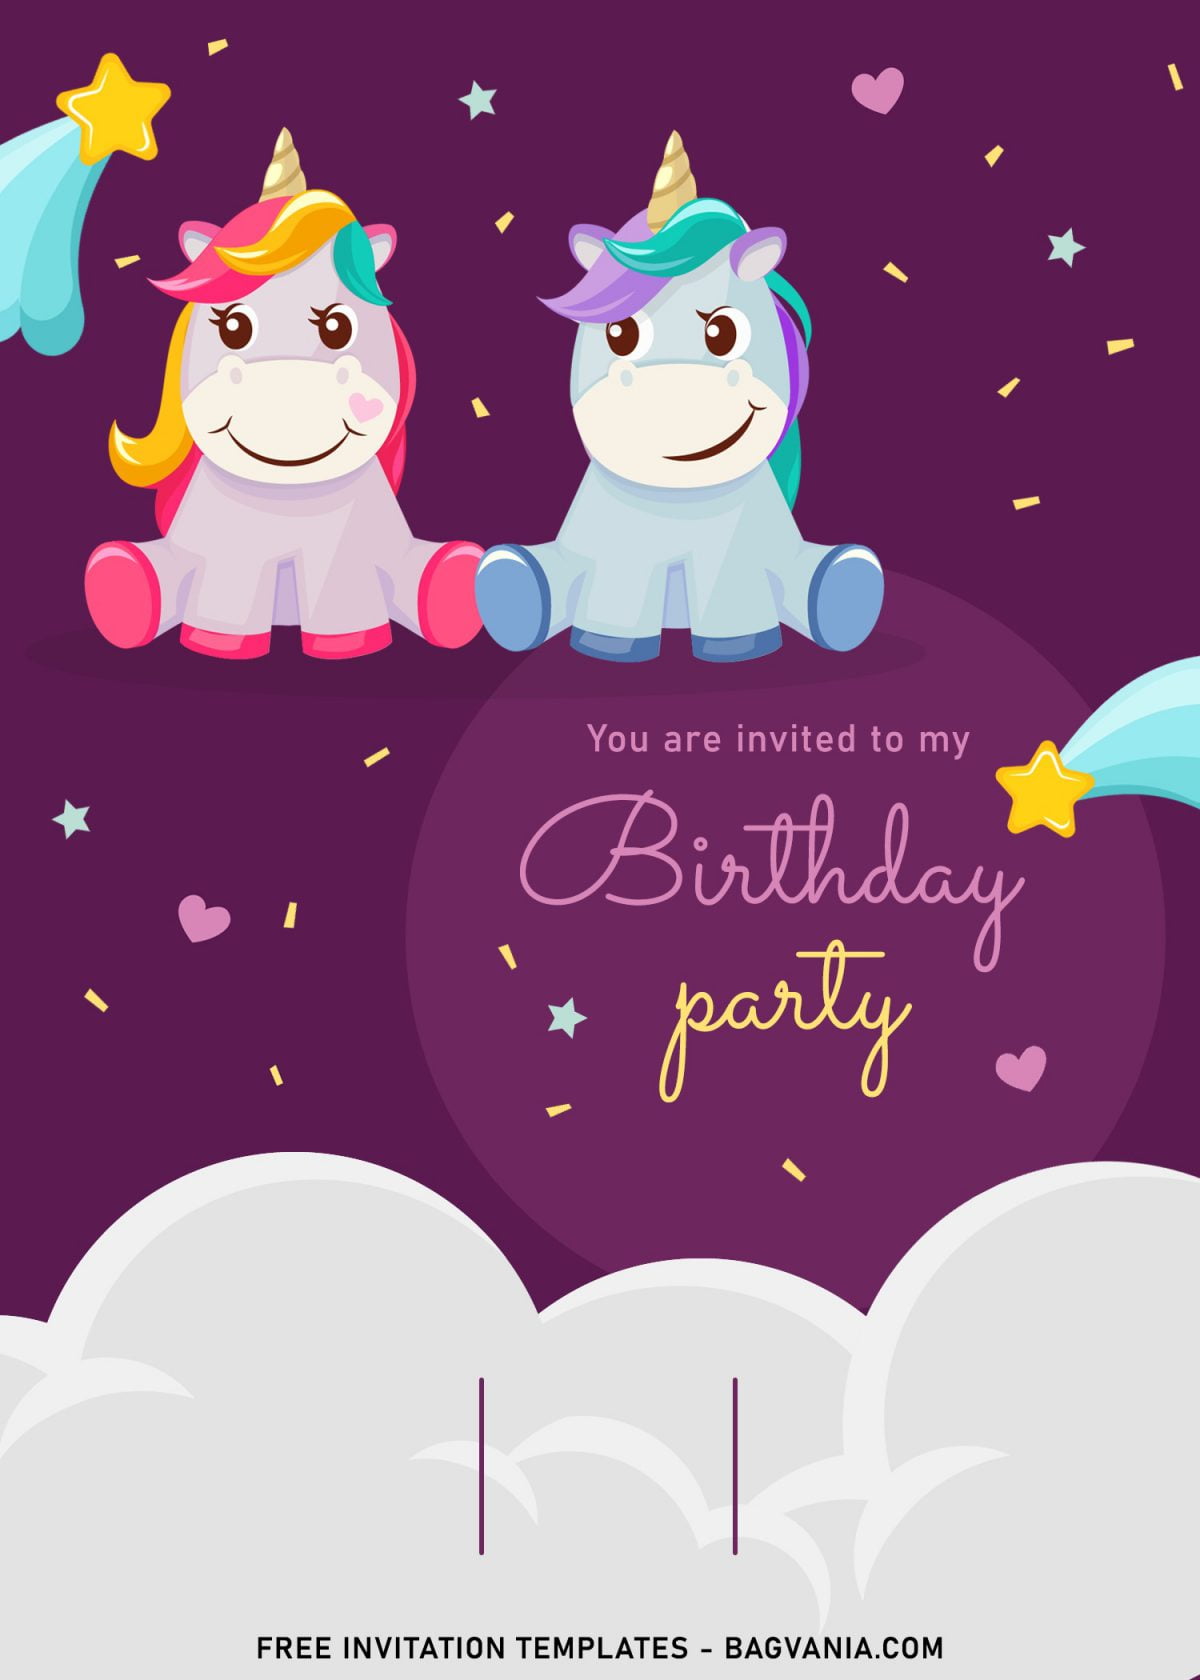 7+ Magical Rainbow Unicorn Birthday Invitation Templates For Kids Birthday Party and has Twinkling stars